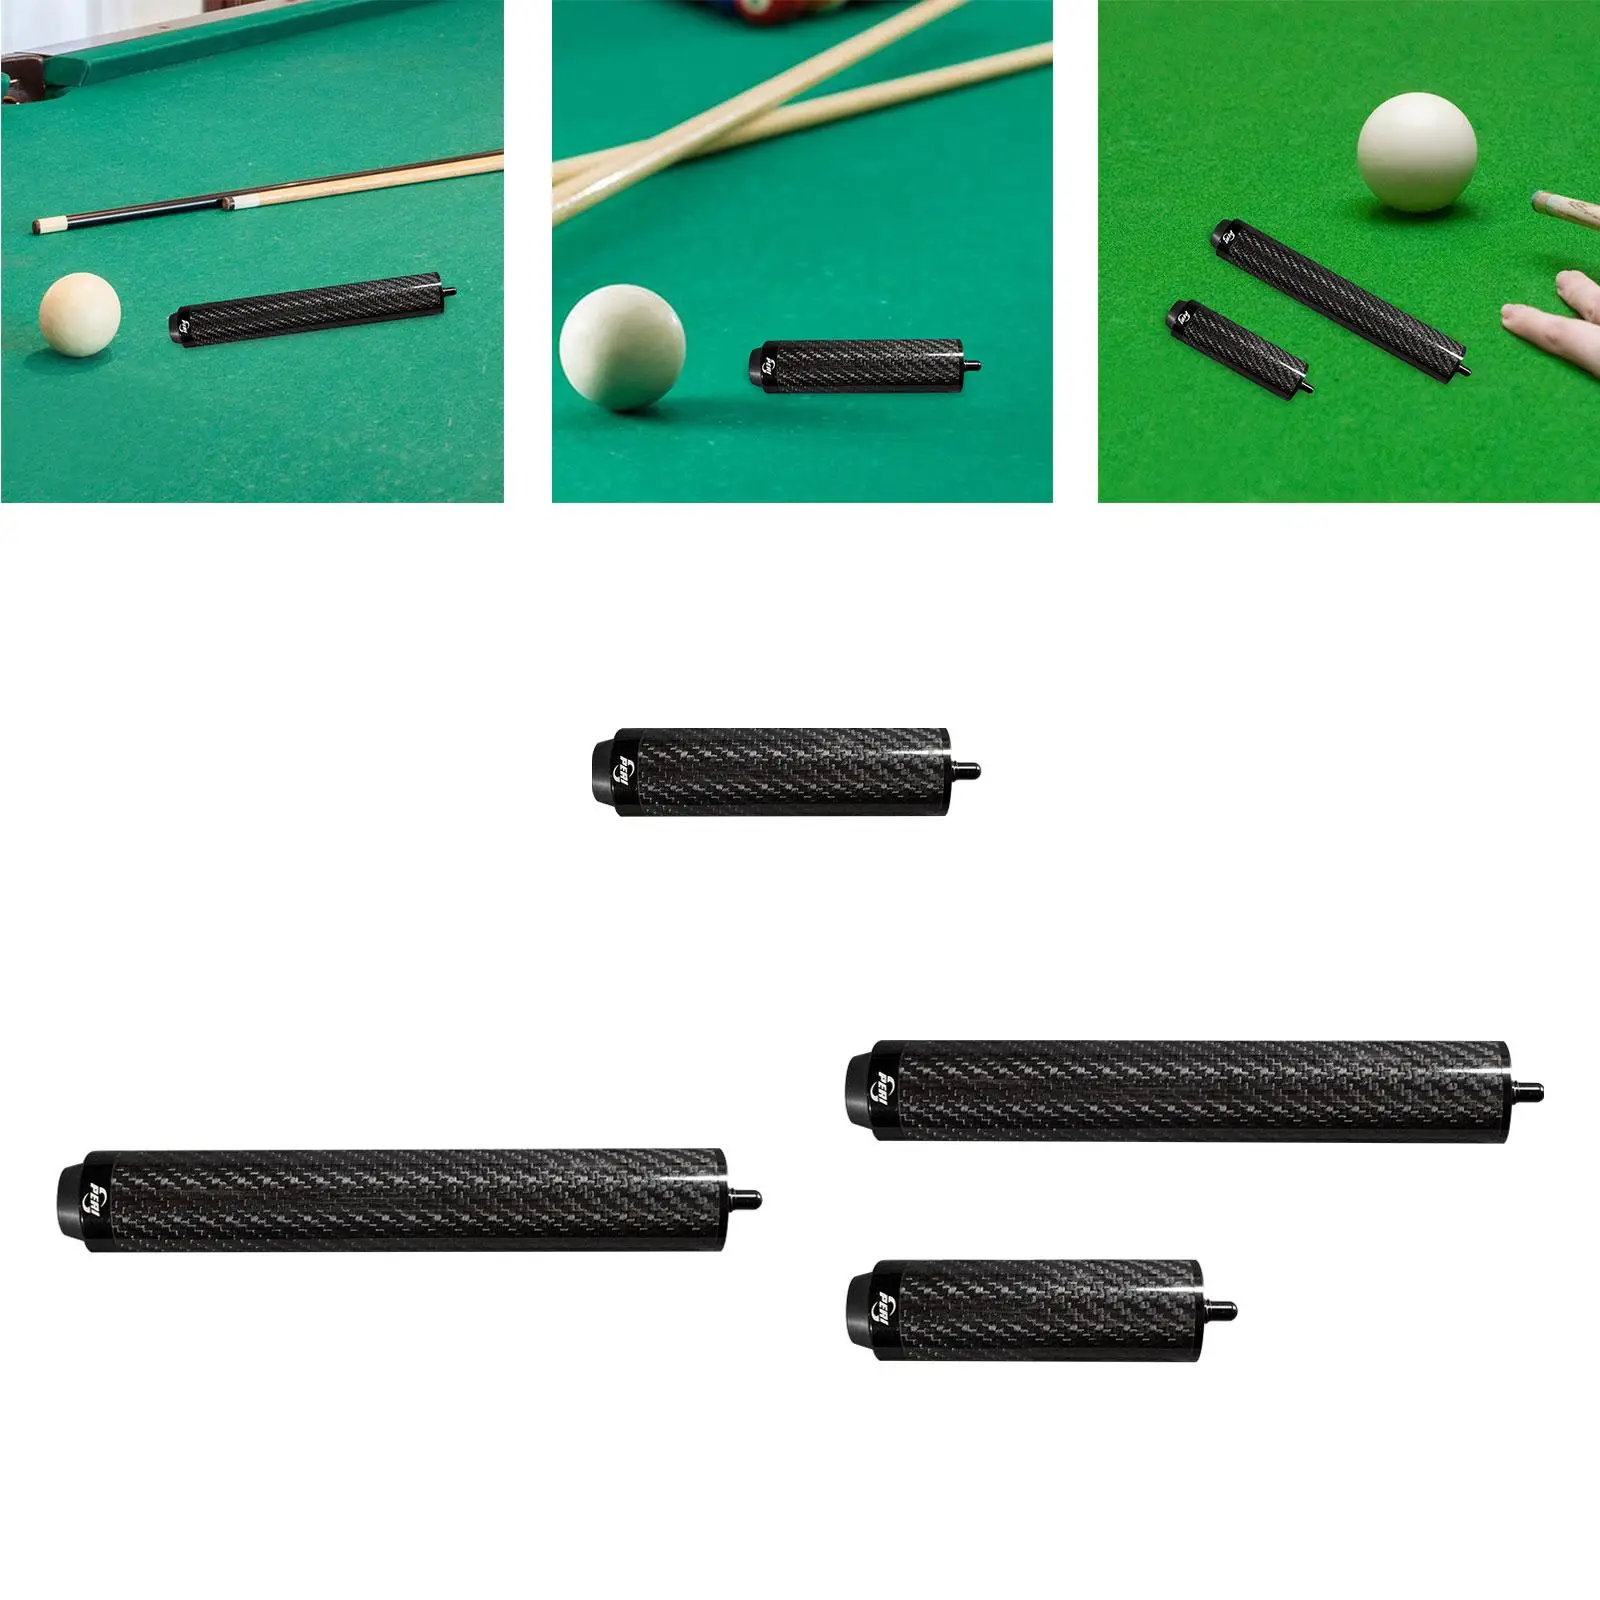 Billiards Pool Cue Extension Enthusiast Compact Beginners Cue Stick Extender